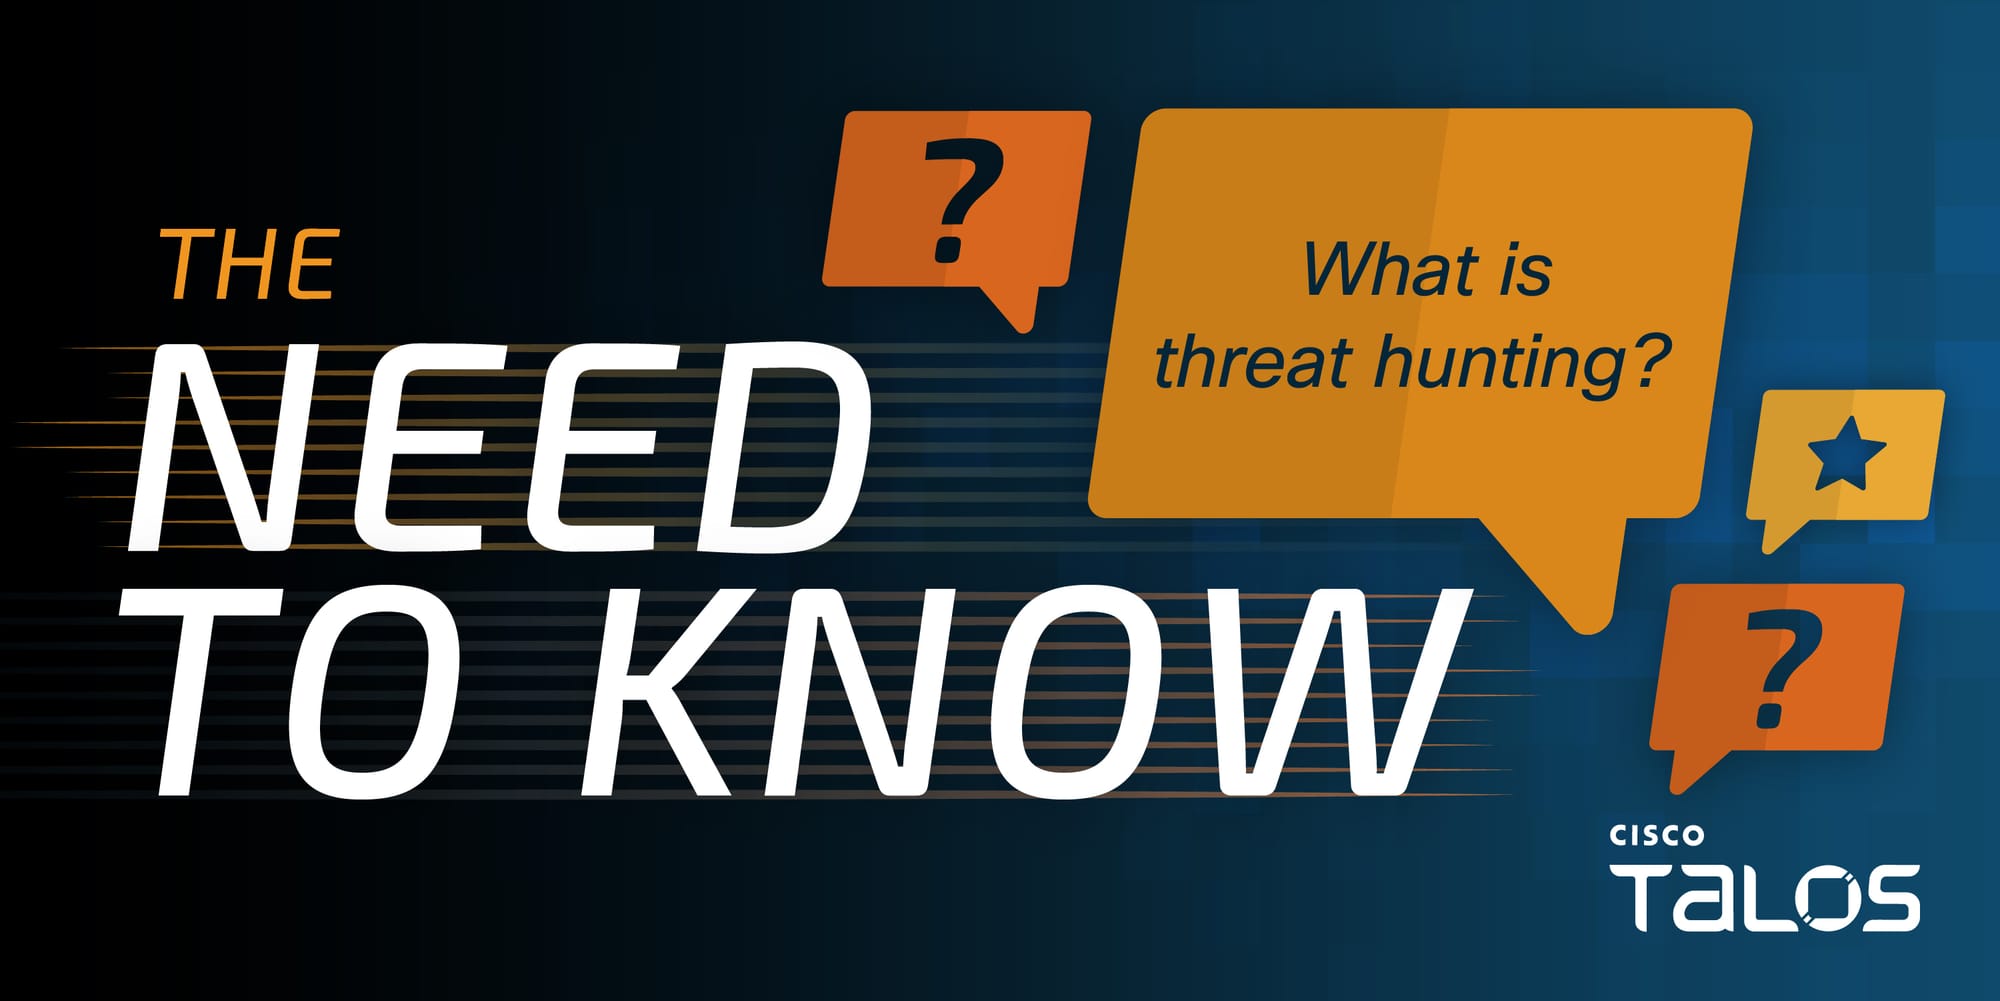 What is threat hunting?